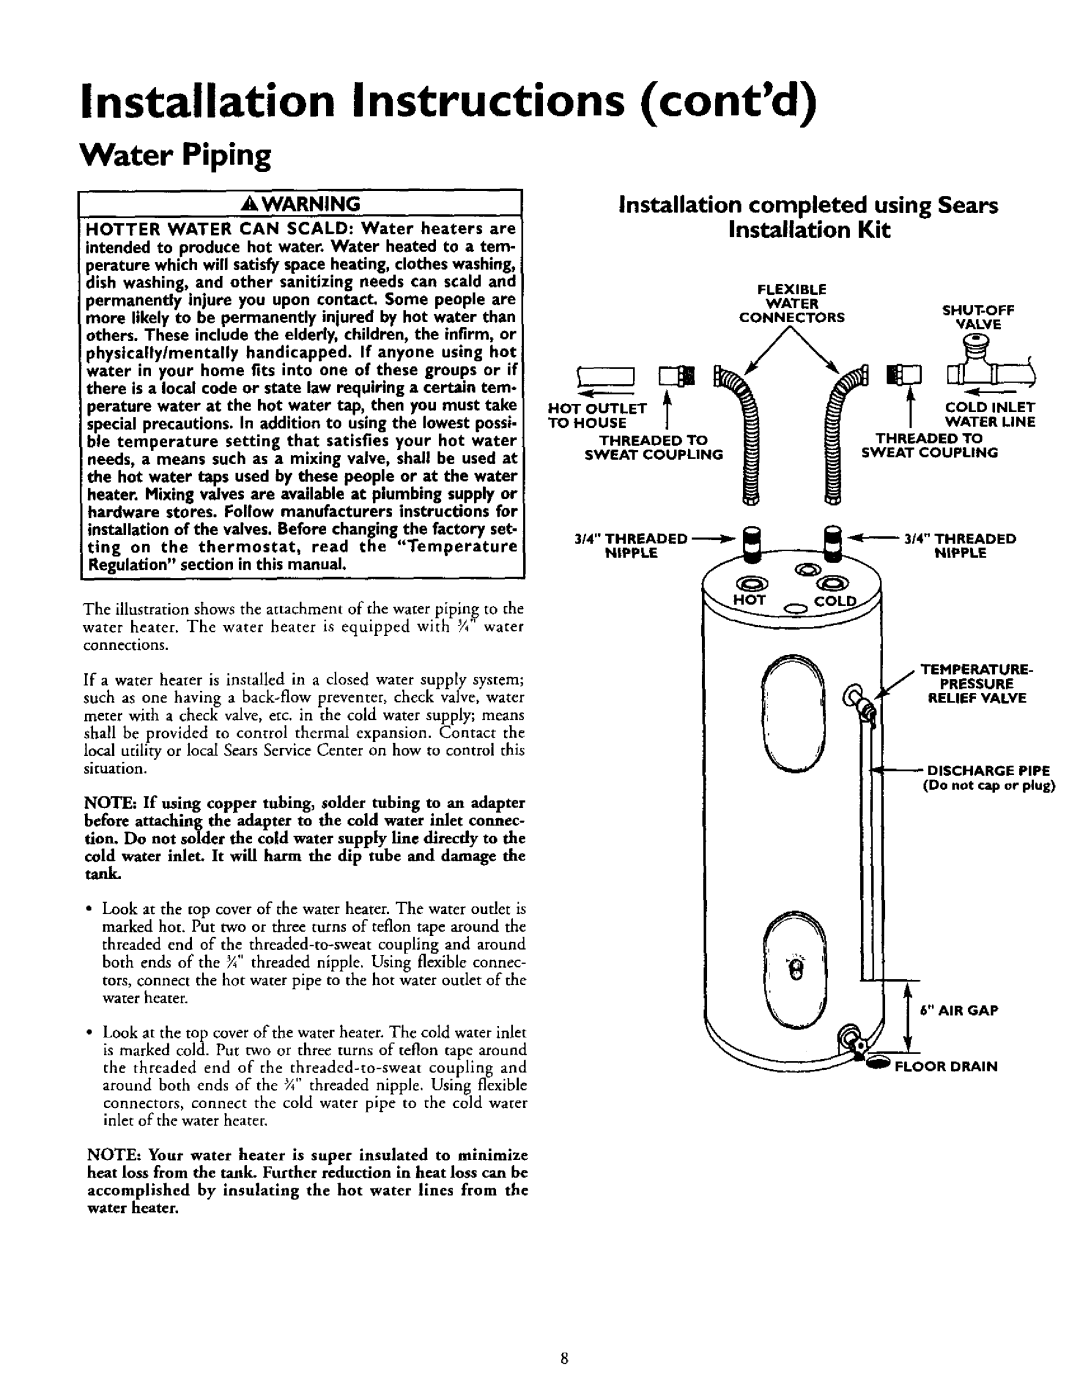 Kenmore 153.327663 Installation Instructions contd, Water Piping, Installation completed using Sears, Installation Kit 